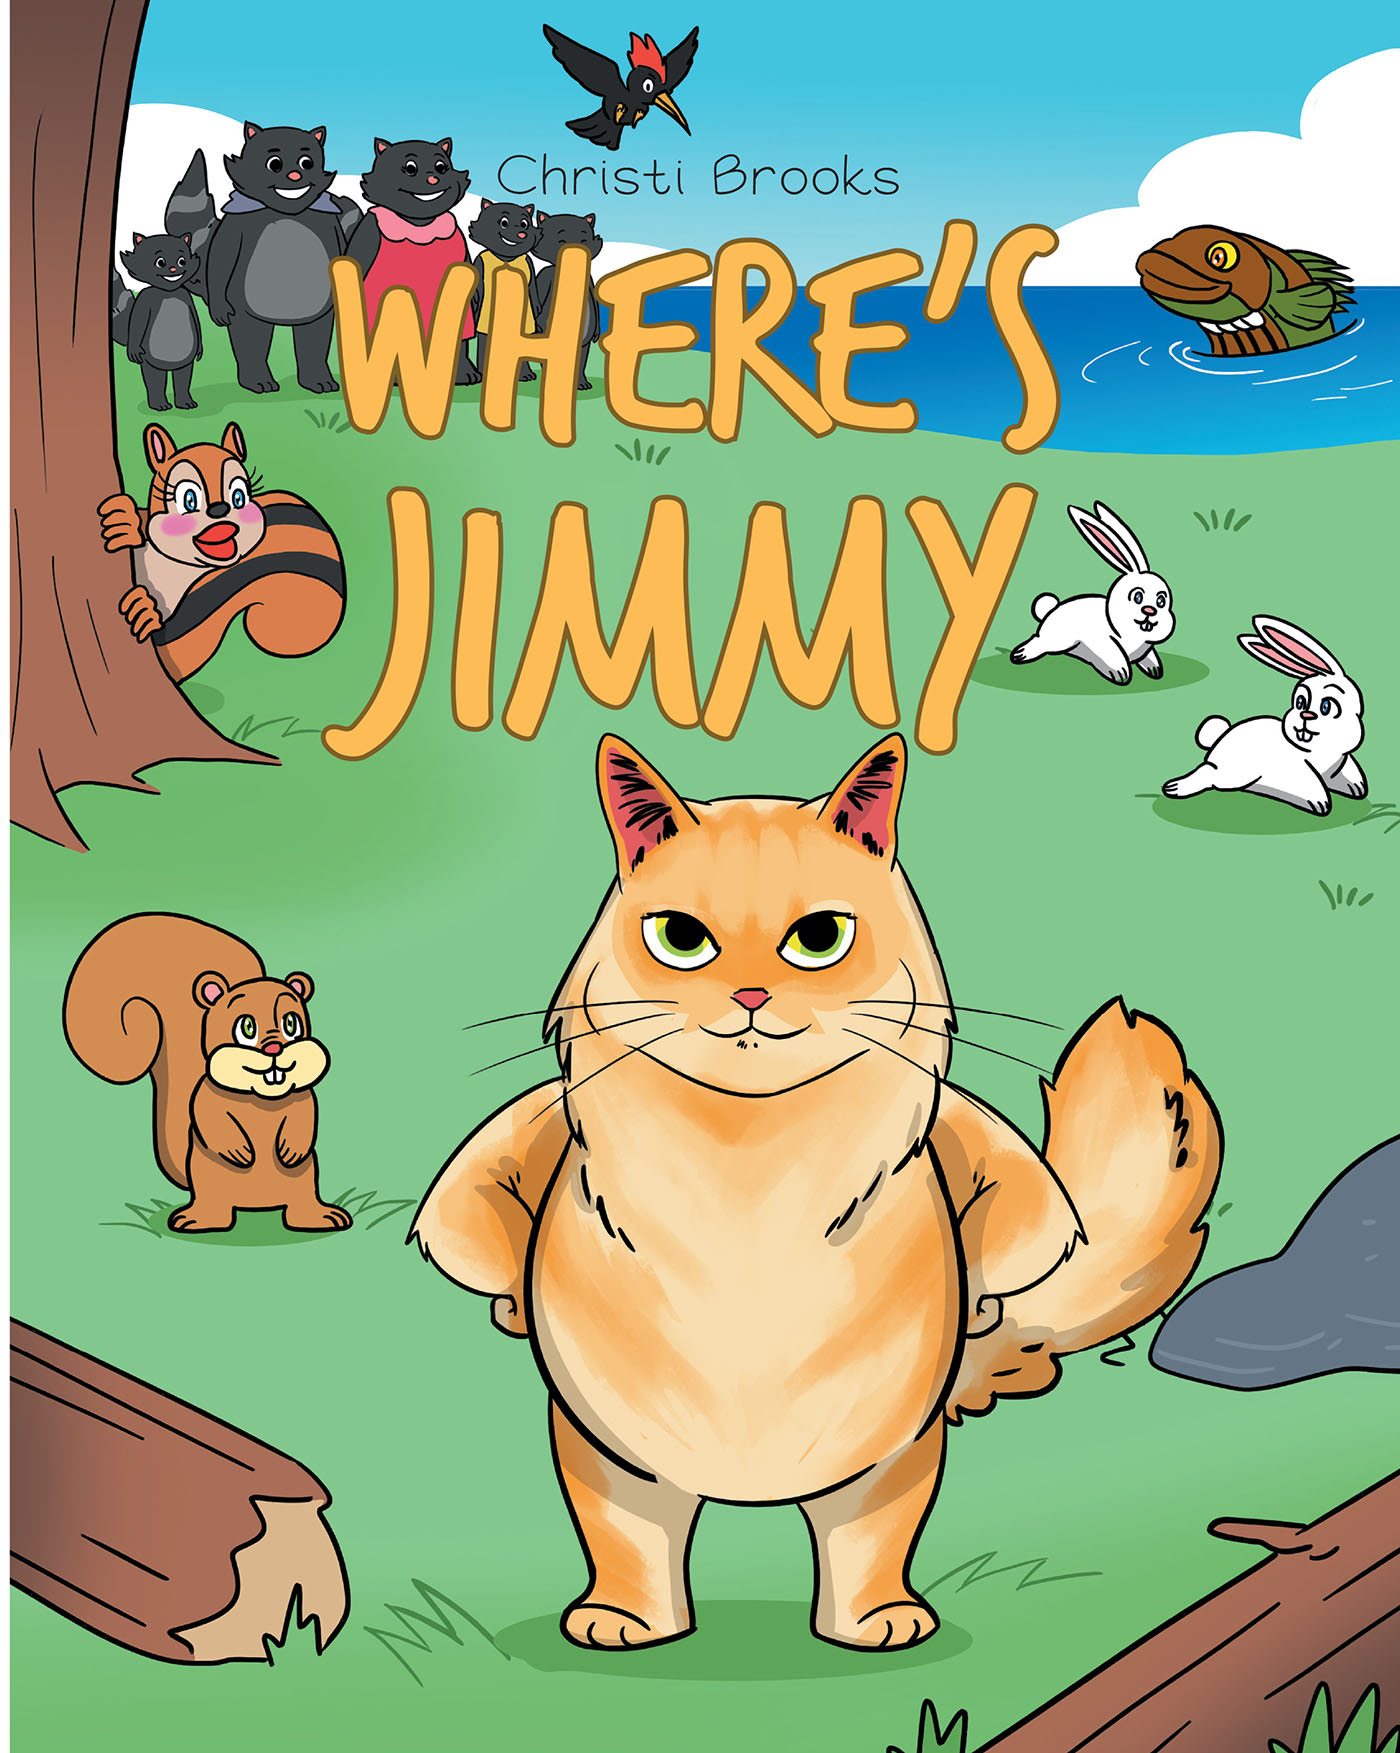 Christi Brooks’ Book, "Where’s Jimmy," is the Story of a Cat Who Runs Away Seeking Fun & Adventure with New Furry Friends Outside That do Not Carry Any Electronic Devices